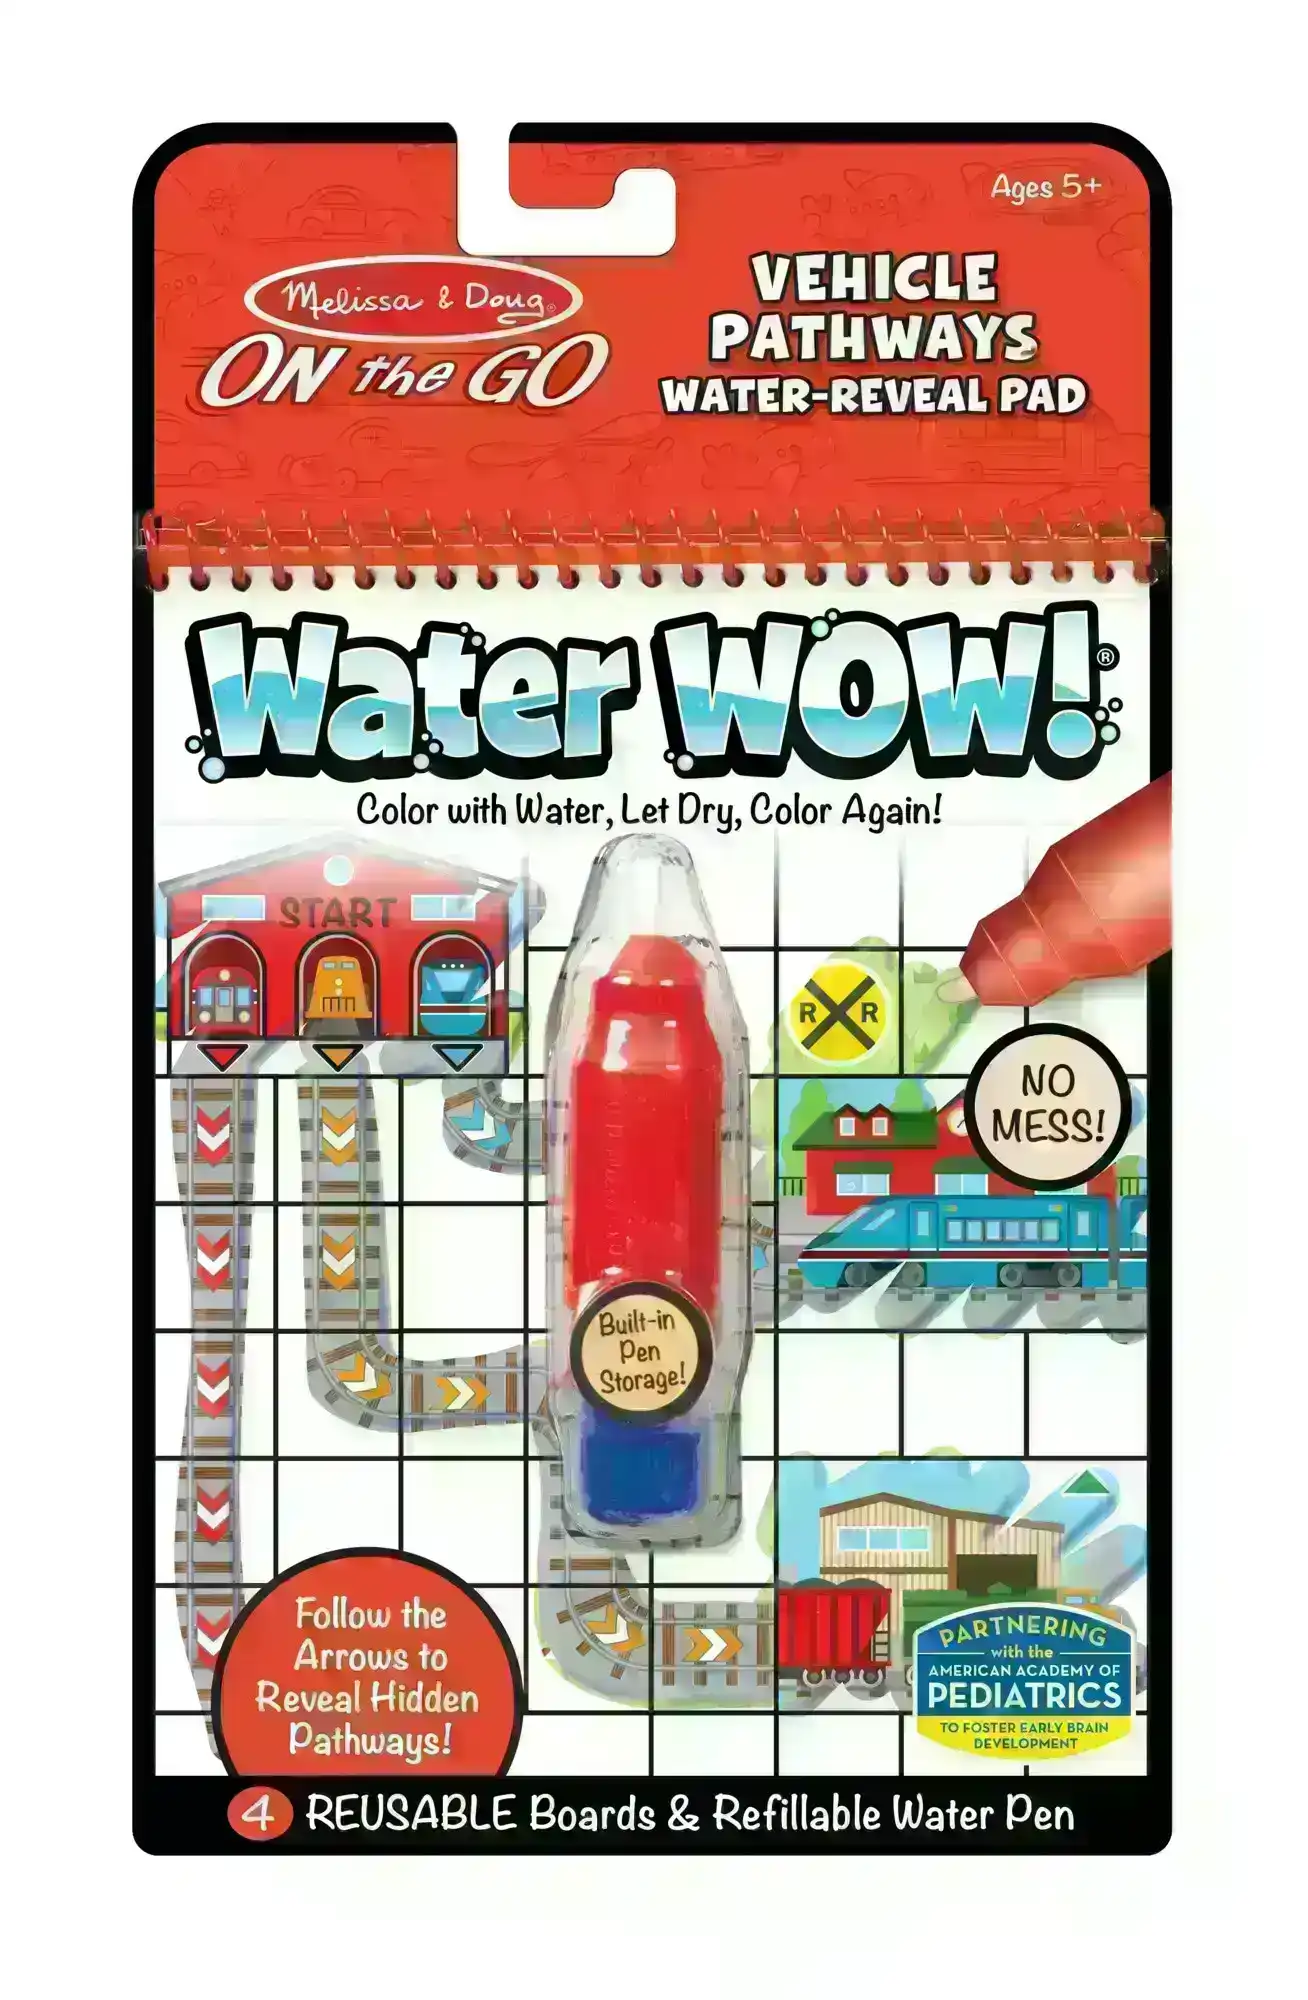 Melissa and Doug - On the Go Water Wow! Vehicle Pathway